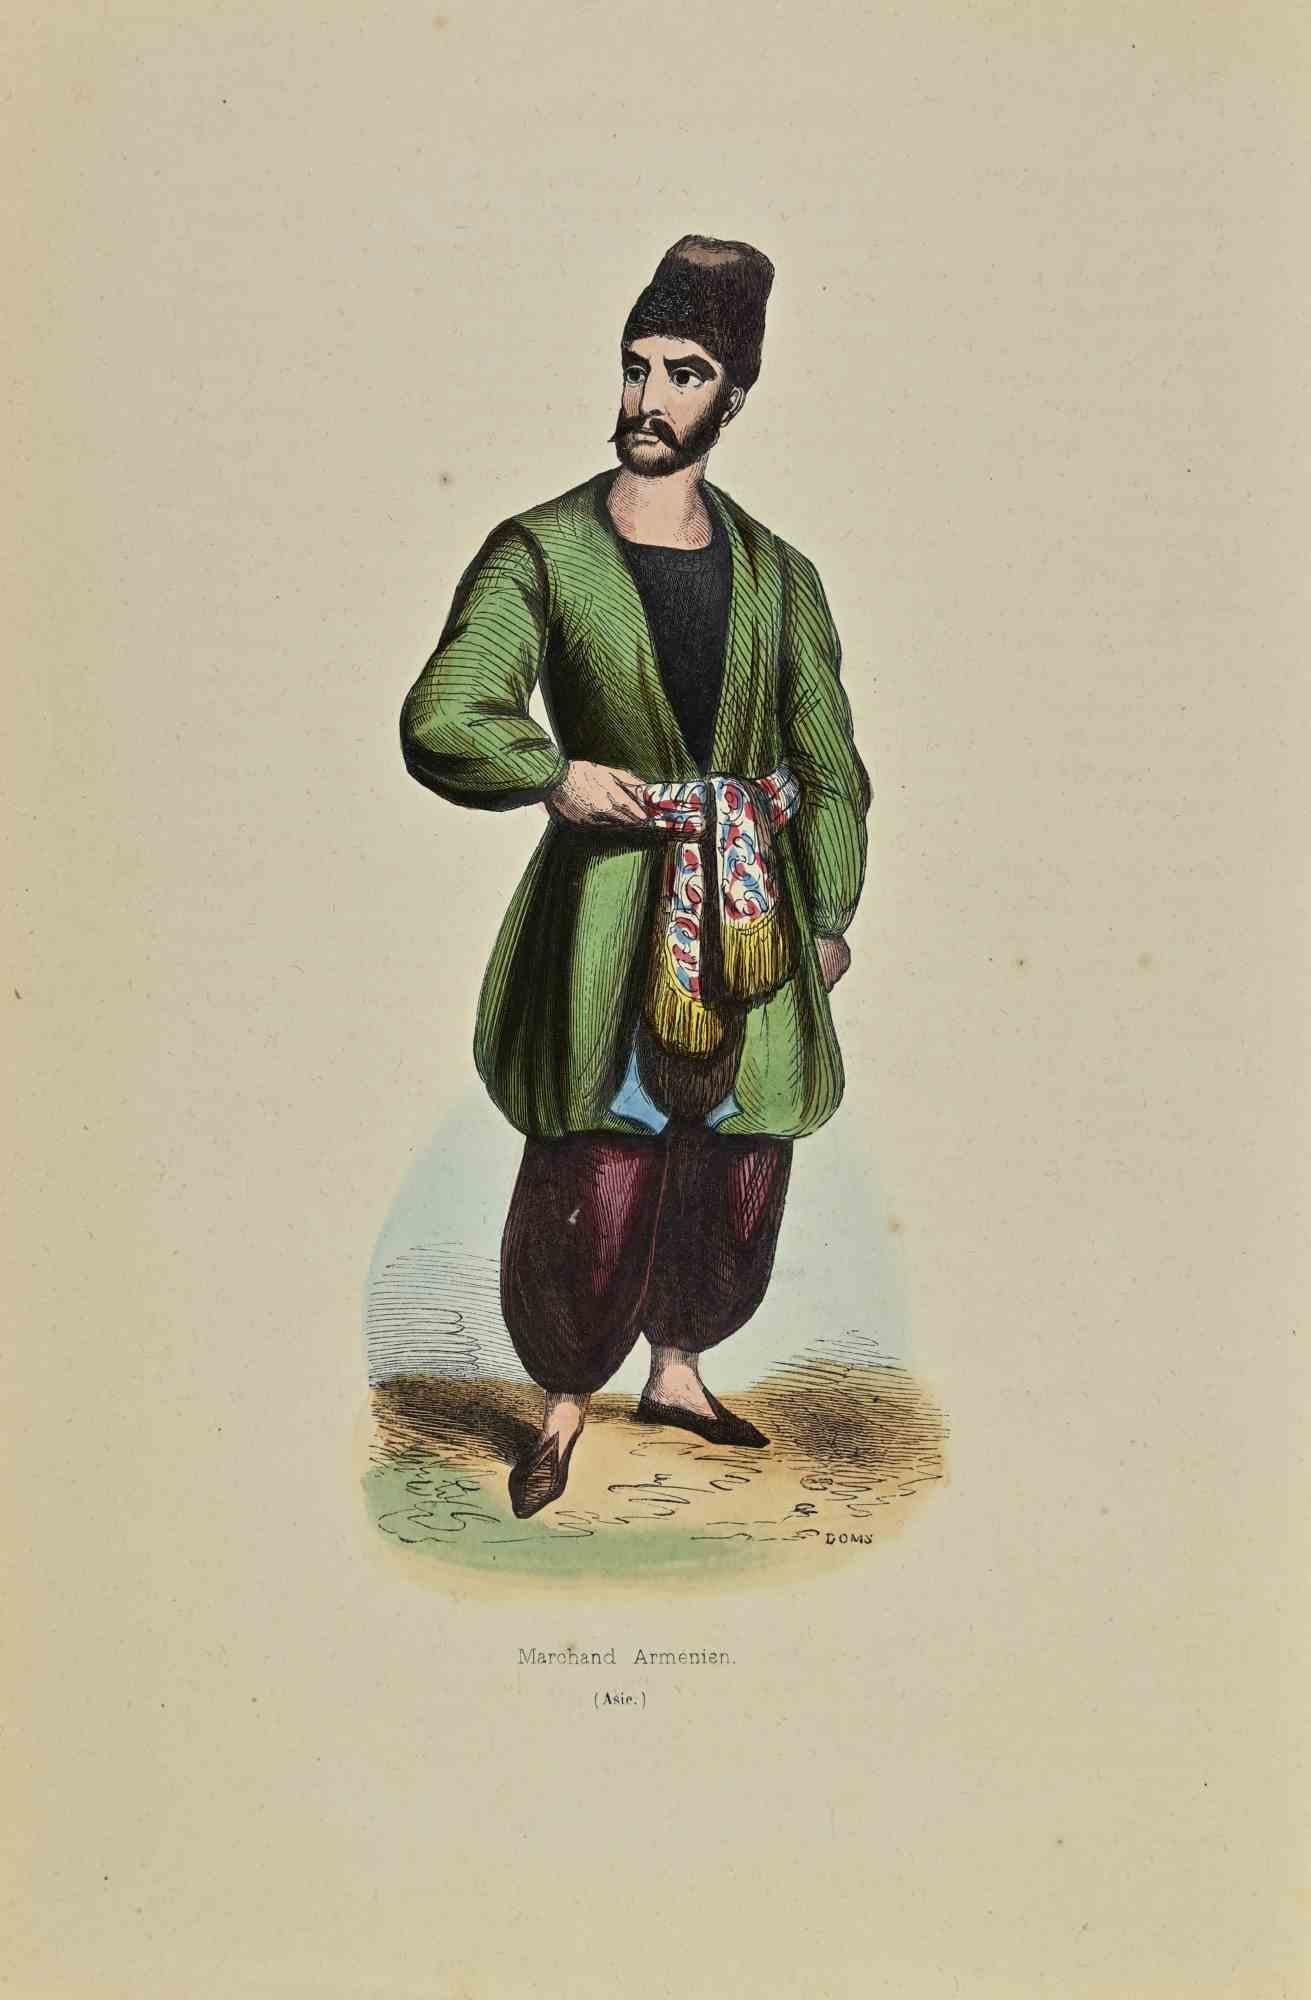 Armenian Merchant is a lithograph made by Auguste Wahlen in 1844.

Hand colored.

Good condition.

At the center of the artwork is the original title "Marchand Armenien".

The work is part of Suite Moeurs, usages et costumes de tous les peuples du